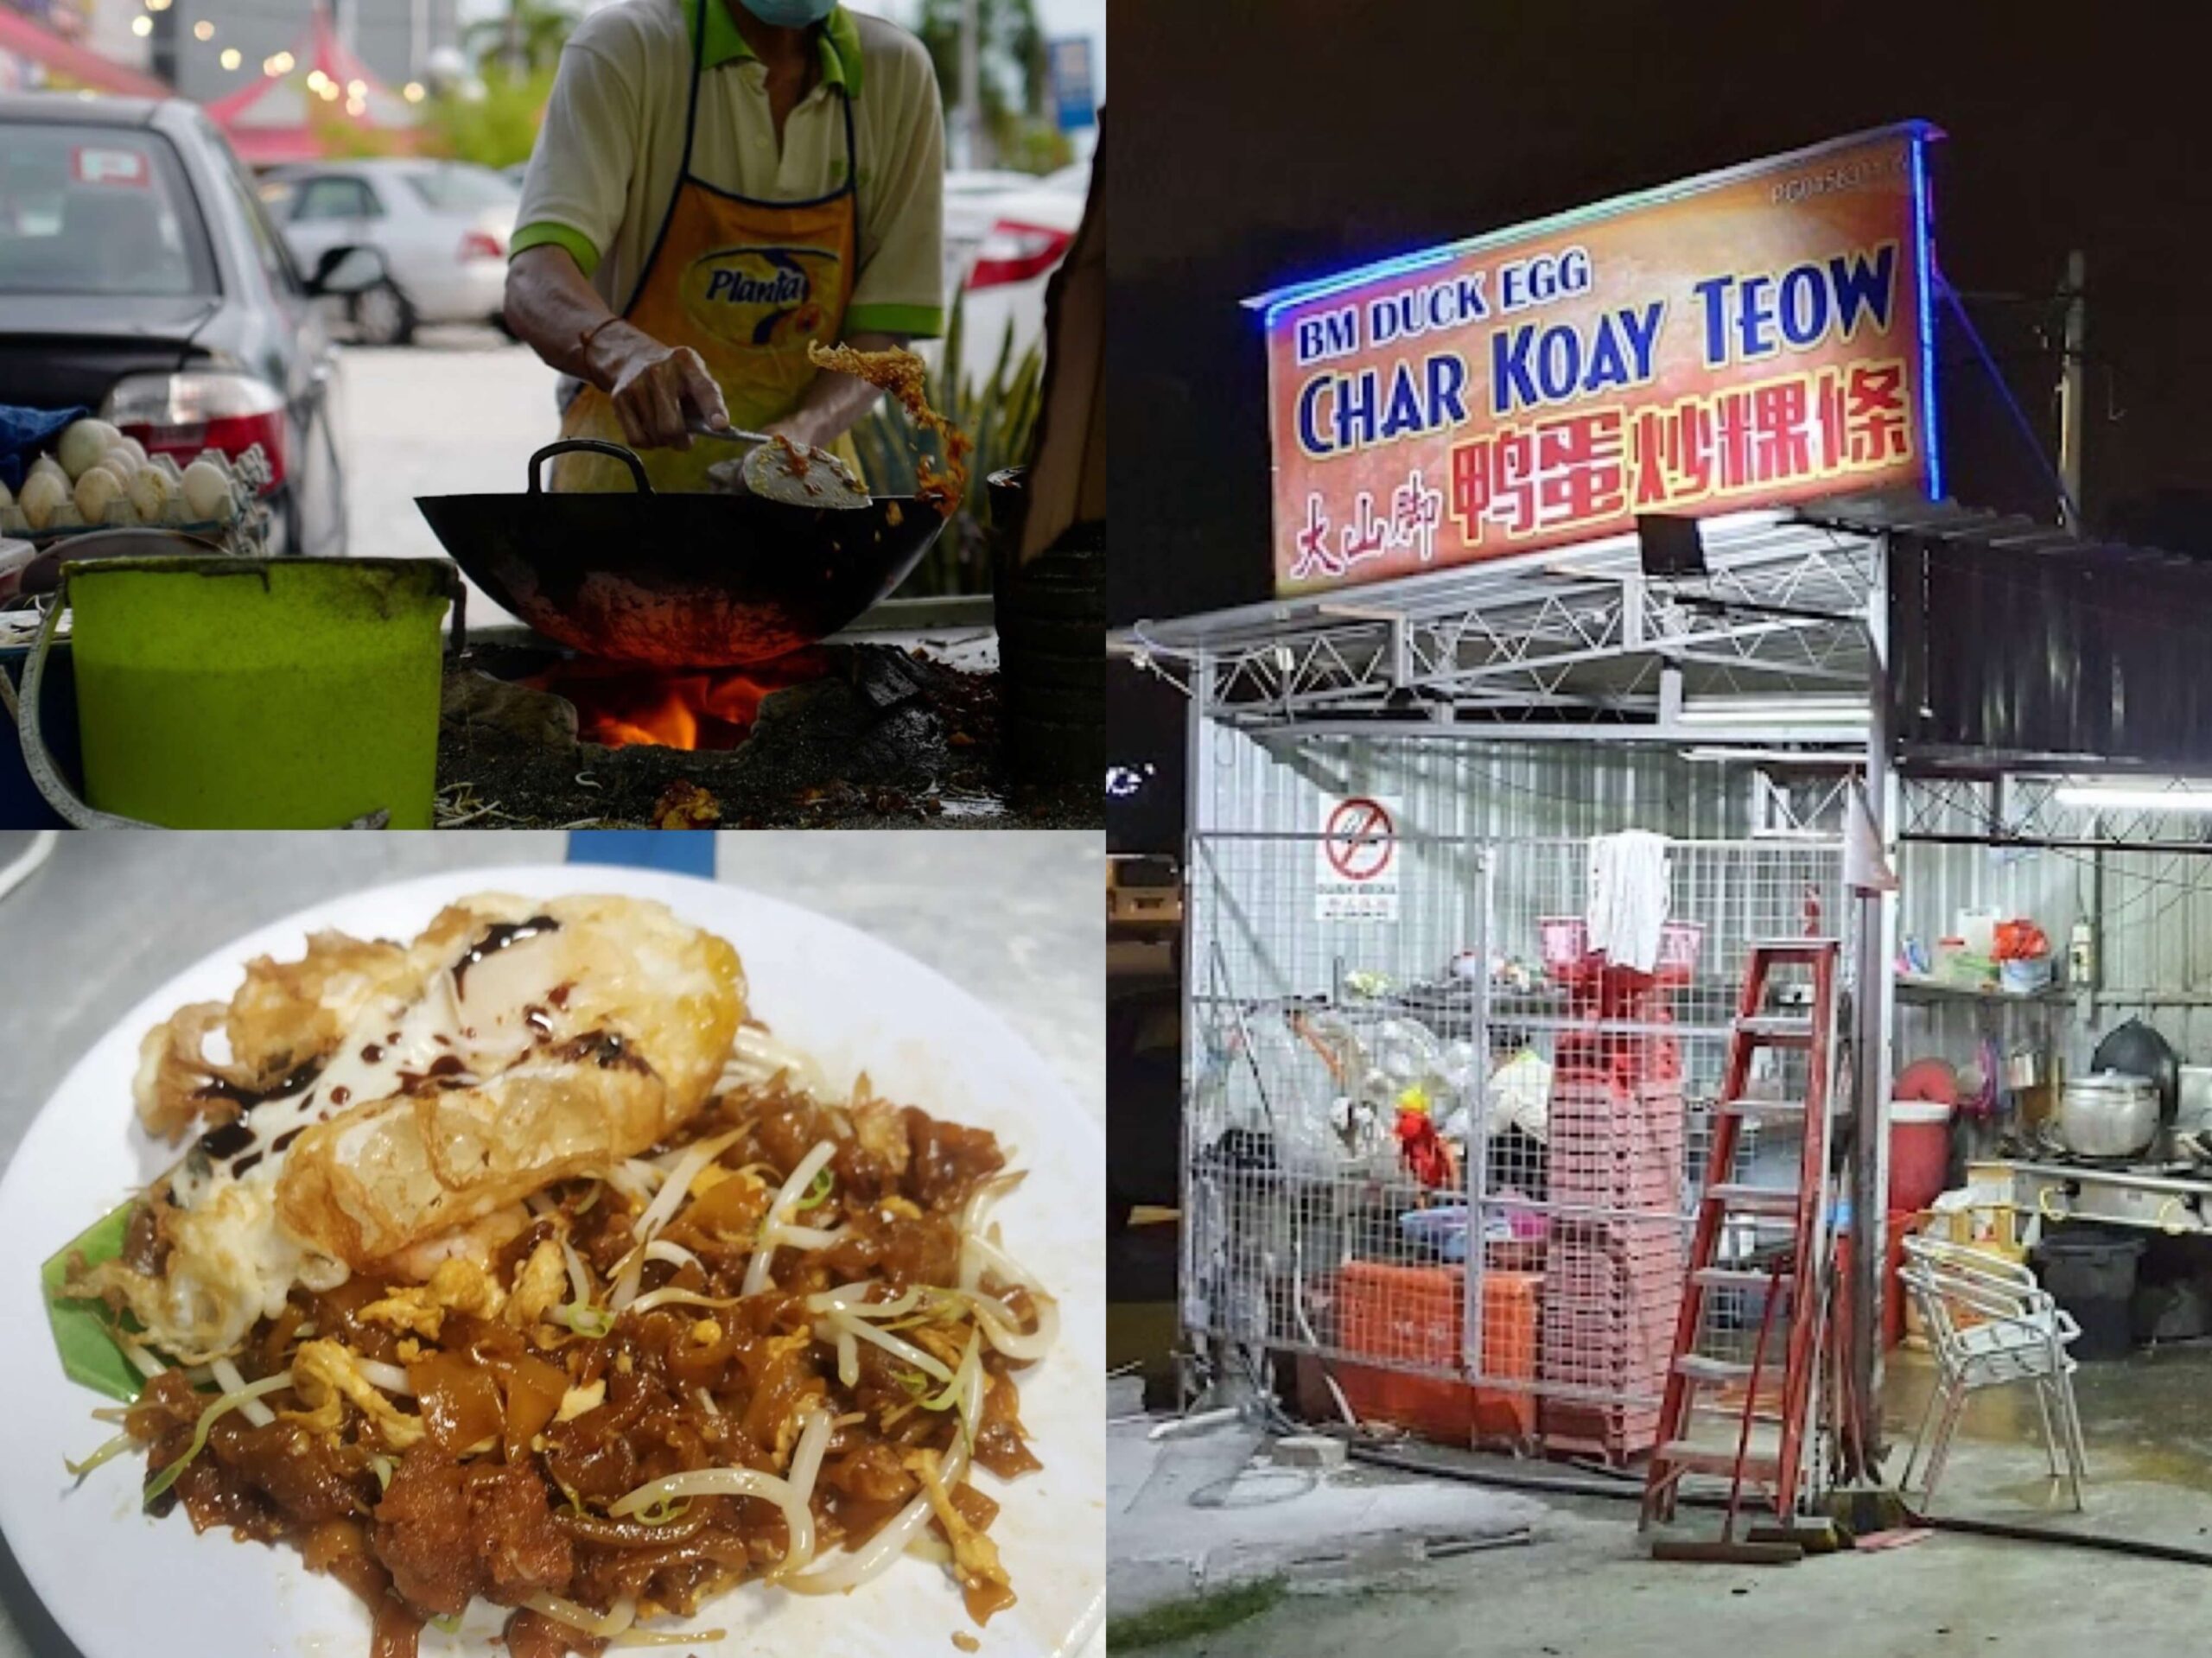 Penang char kuey teow Duck Egg Char Koay Teow